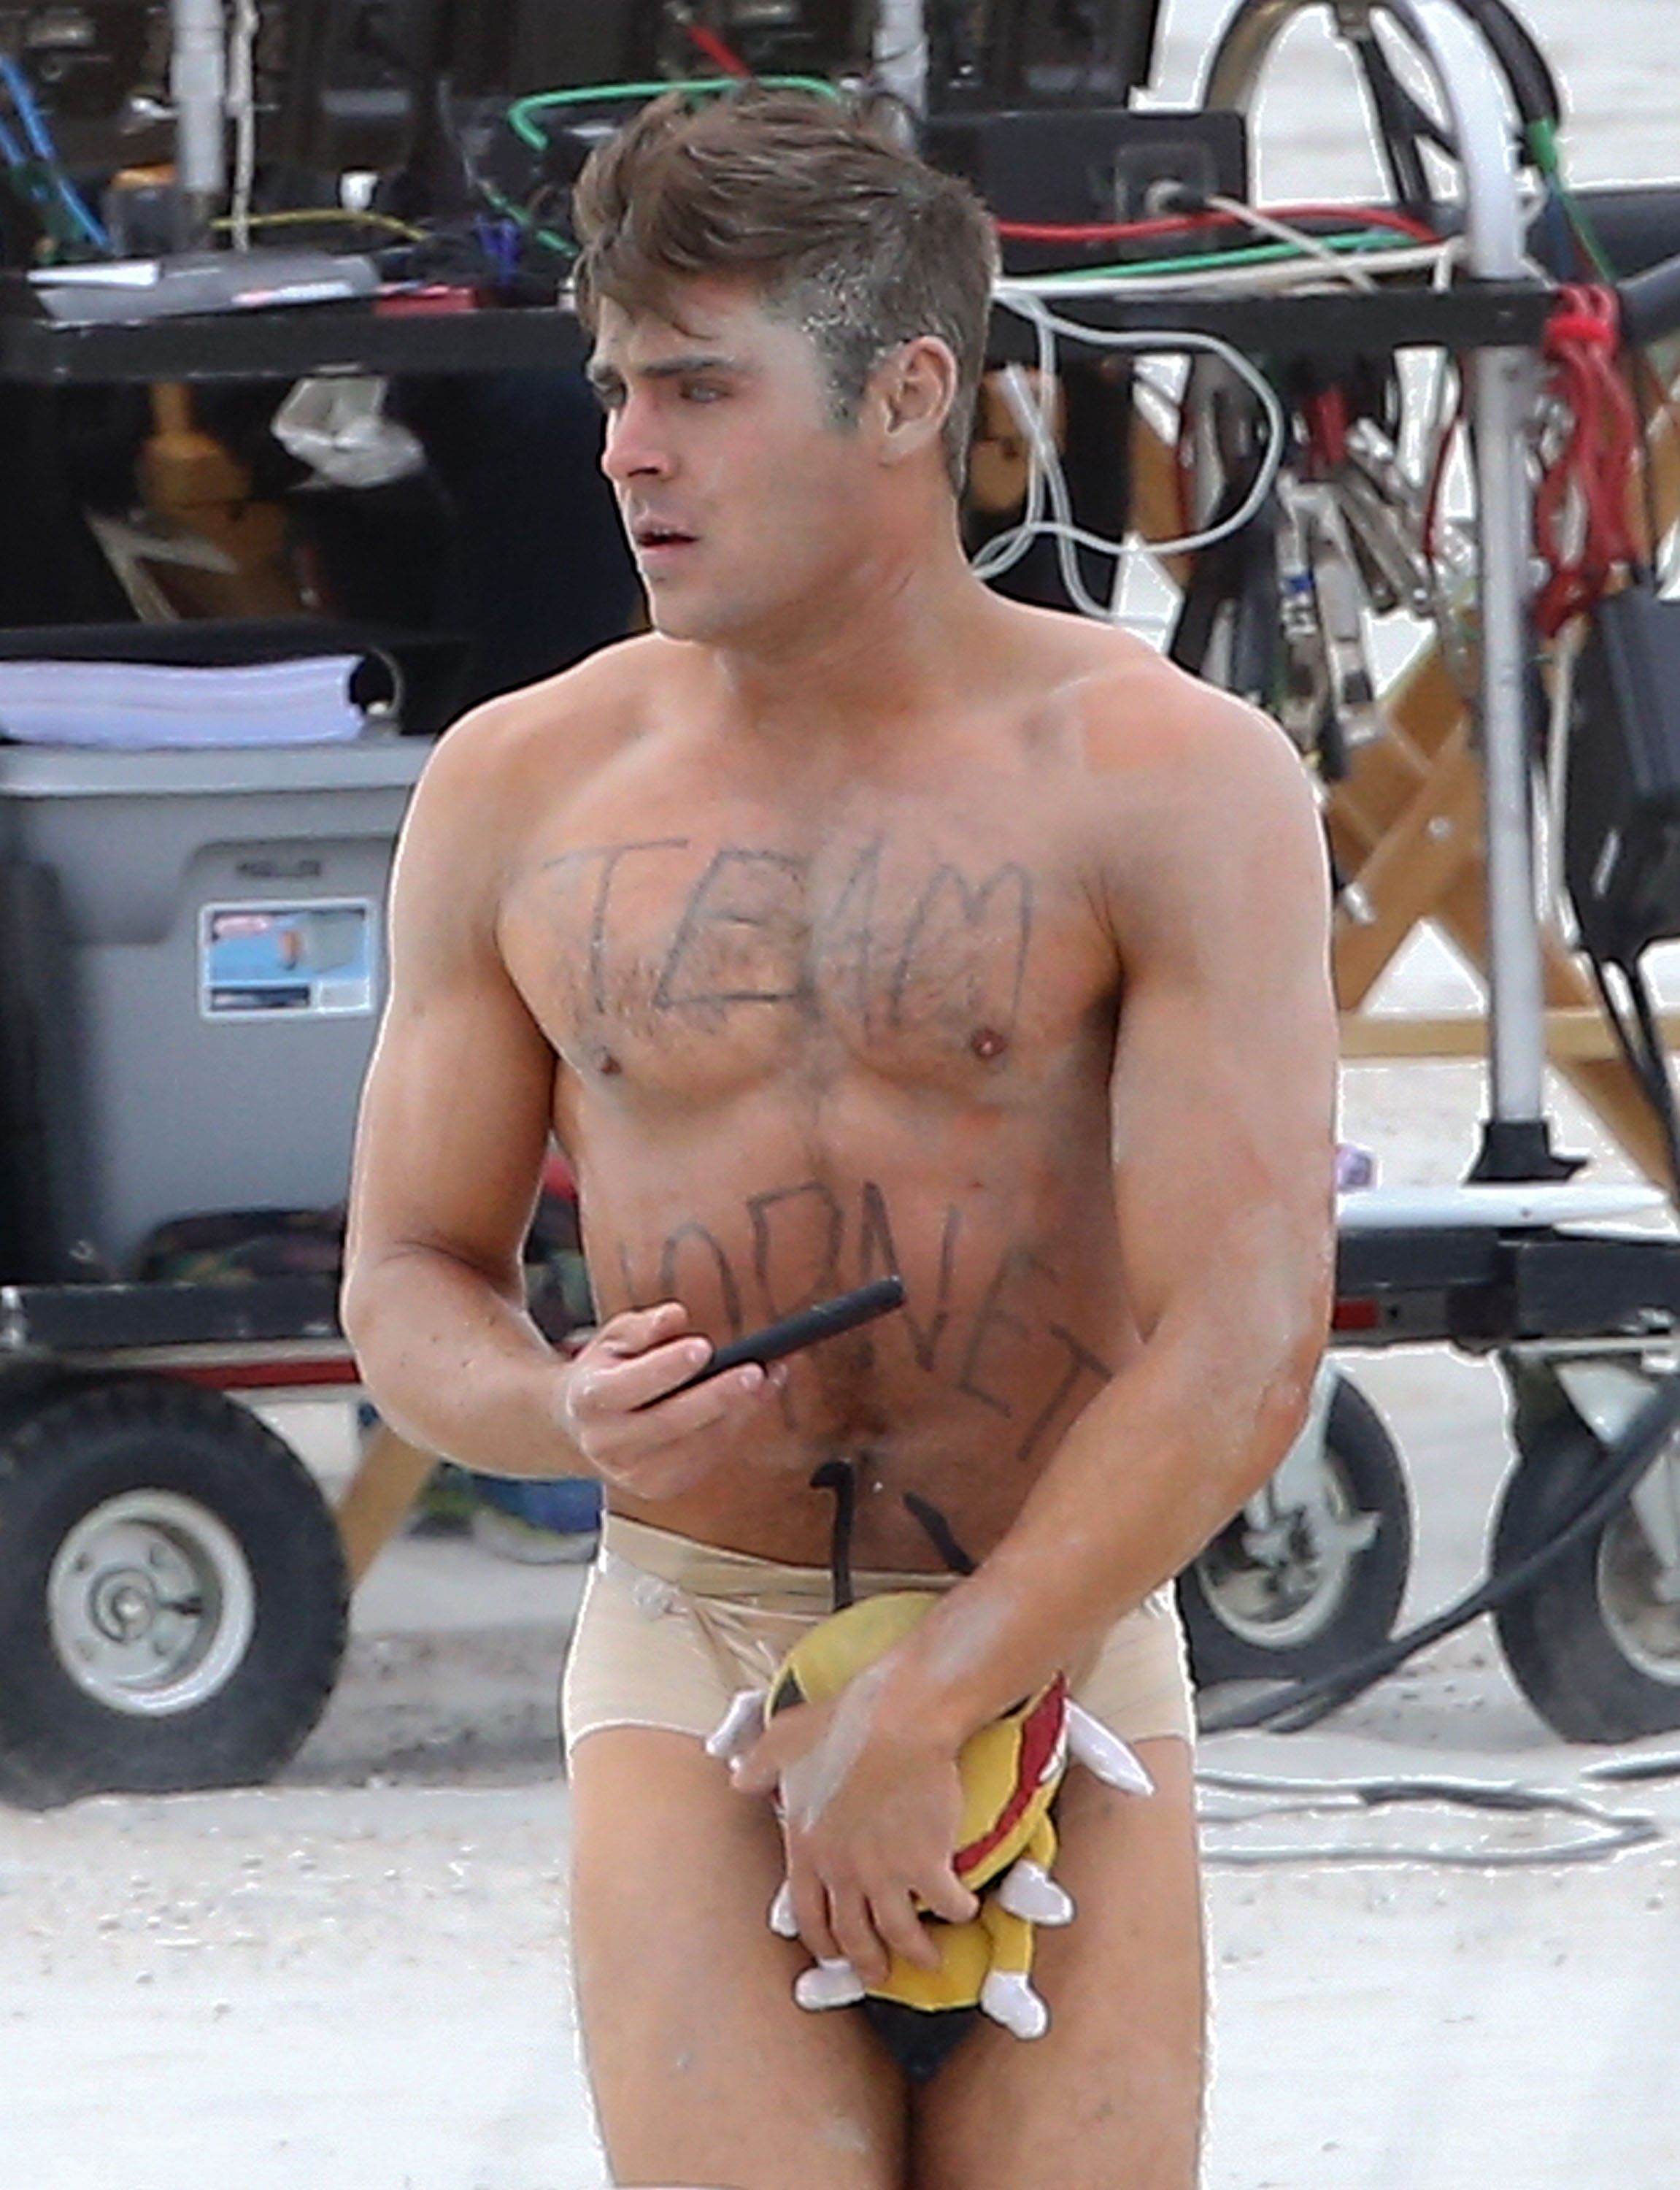 Zac Efron Has The Most Perfect Body Ever